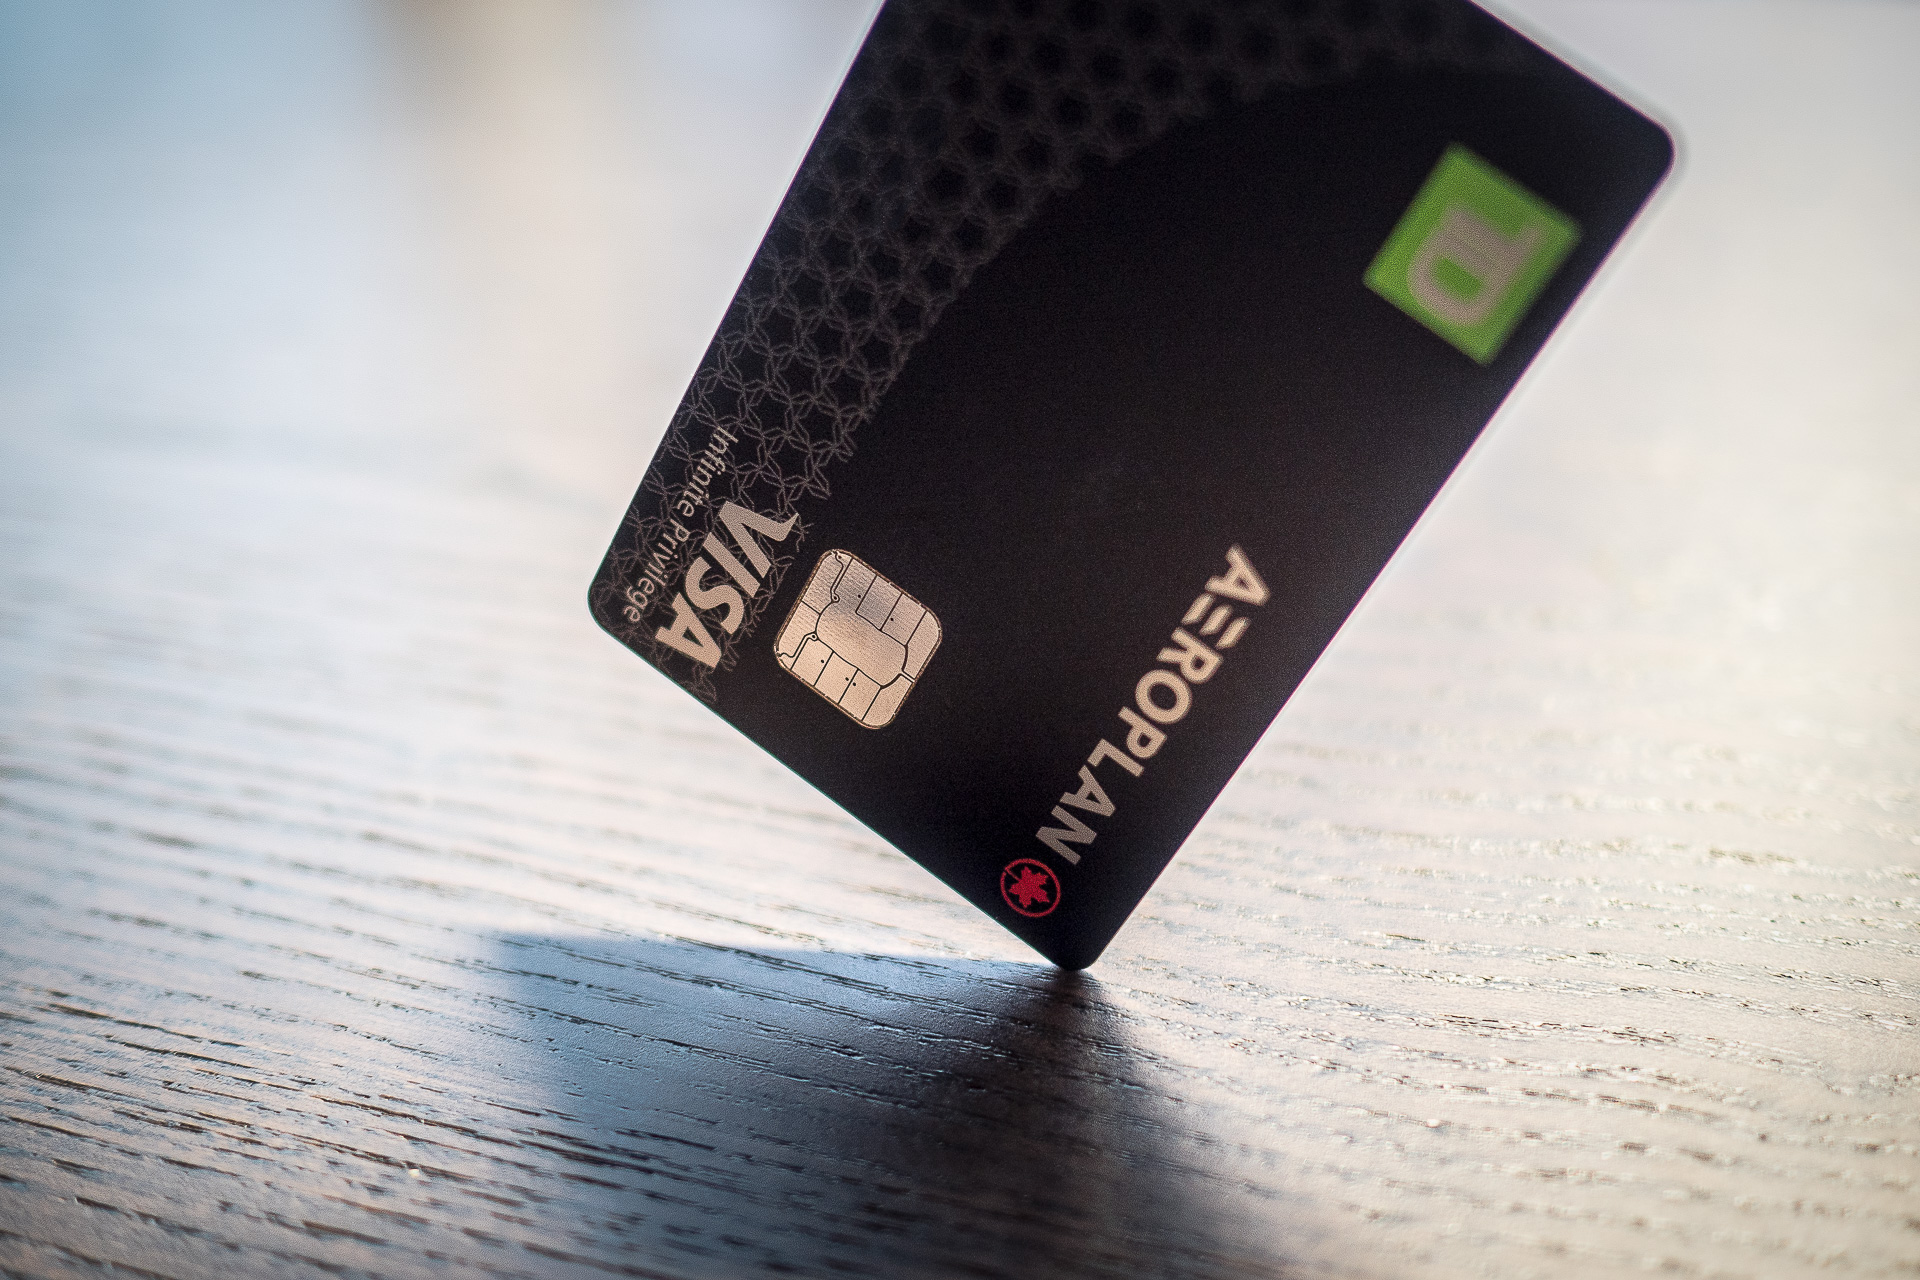 td credit cards for travel